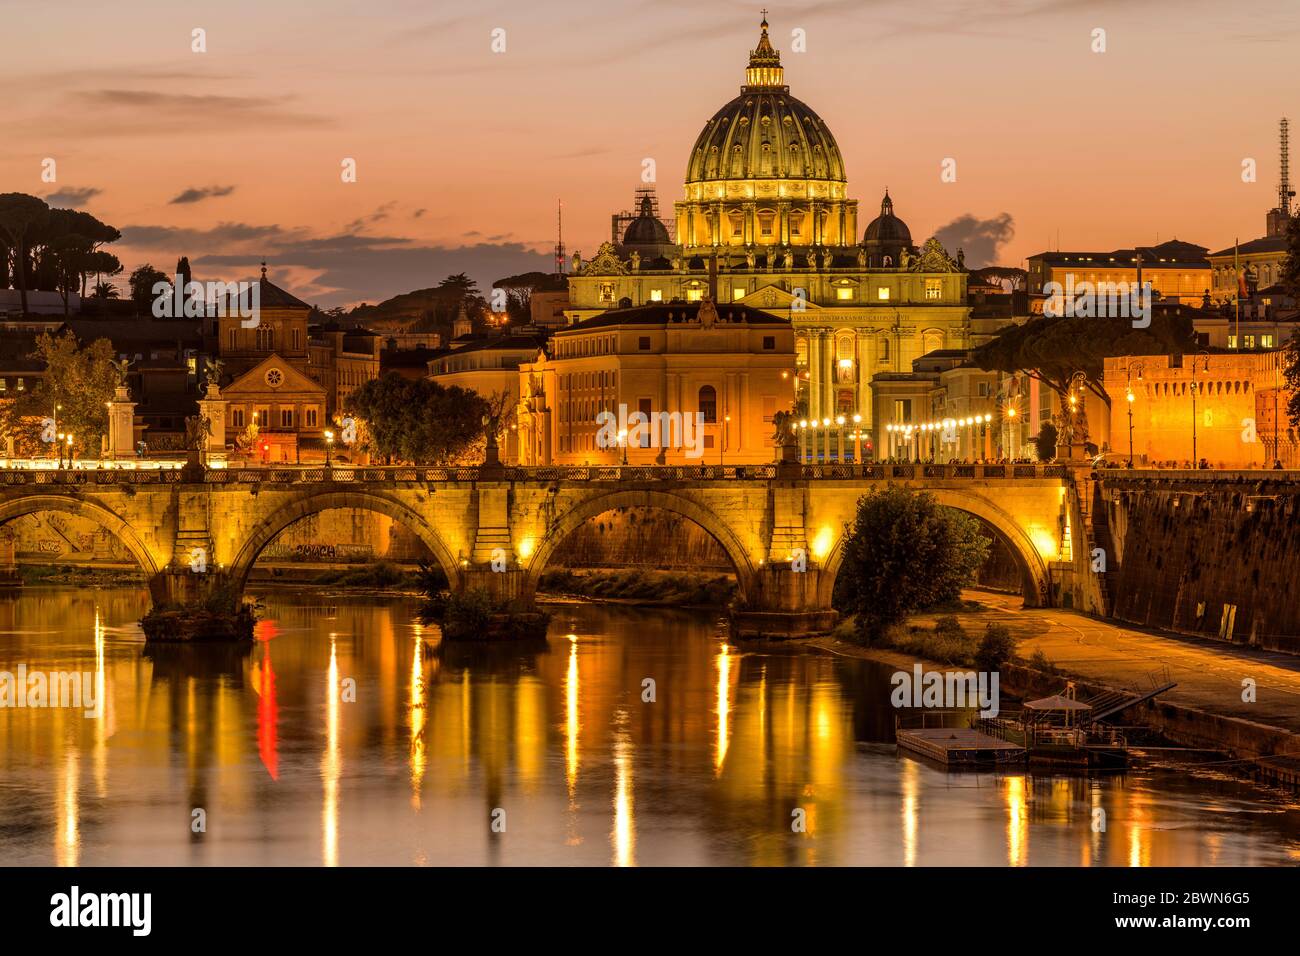 Sunset Tiber River - Colorful dusk view of Tiber river at Sant' Angelo Bridge, with St. Peter's Basilica towering in background, Rome, Italy. Stock Photo